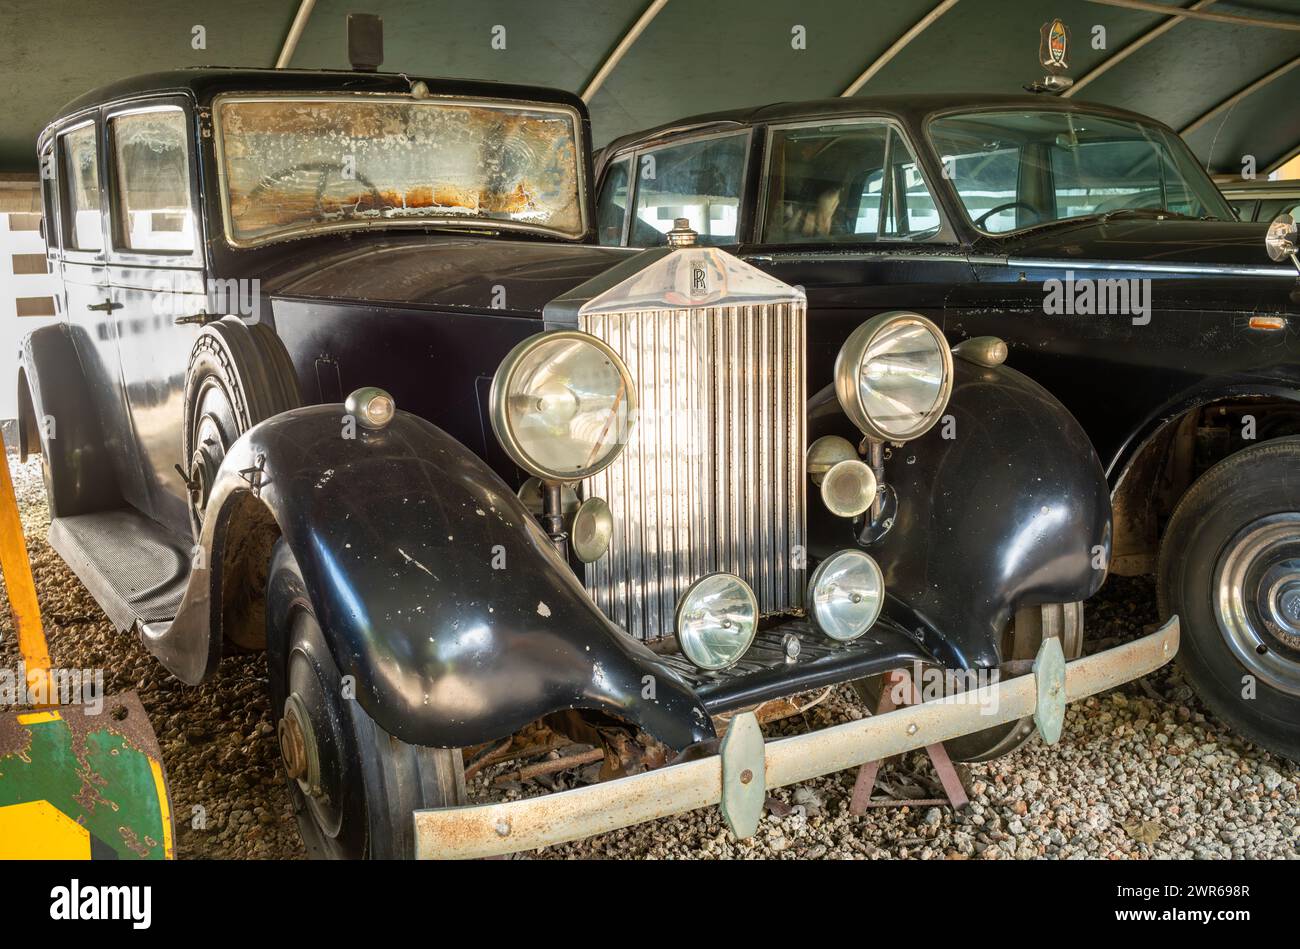 1938 Rolls-Royce Phantom III used by colonial and government officials, National Museum, Dar es Salaam, Tanzania. Stock Photo